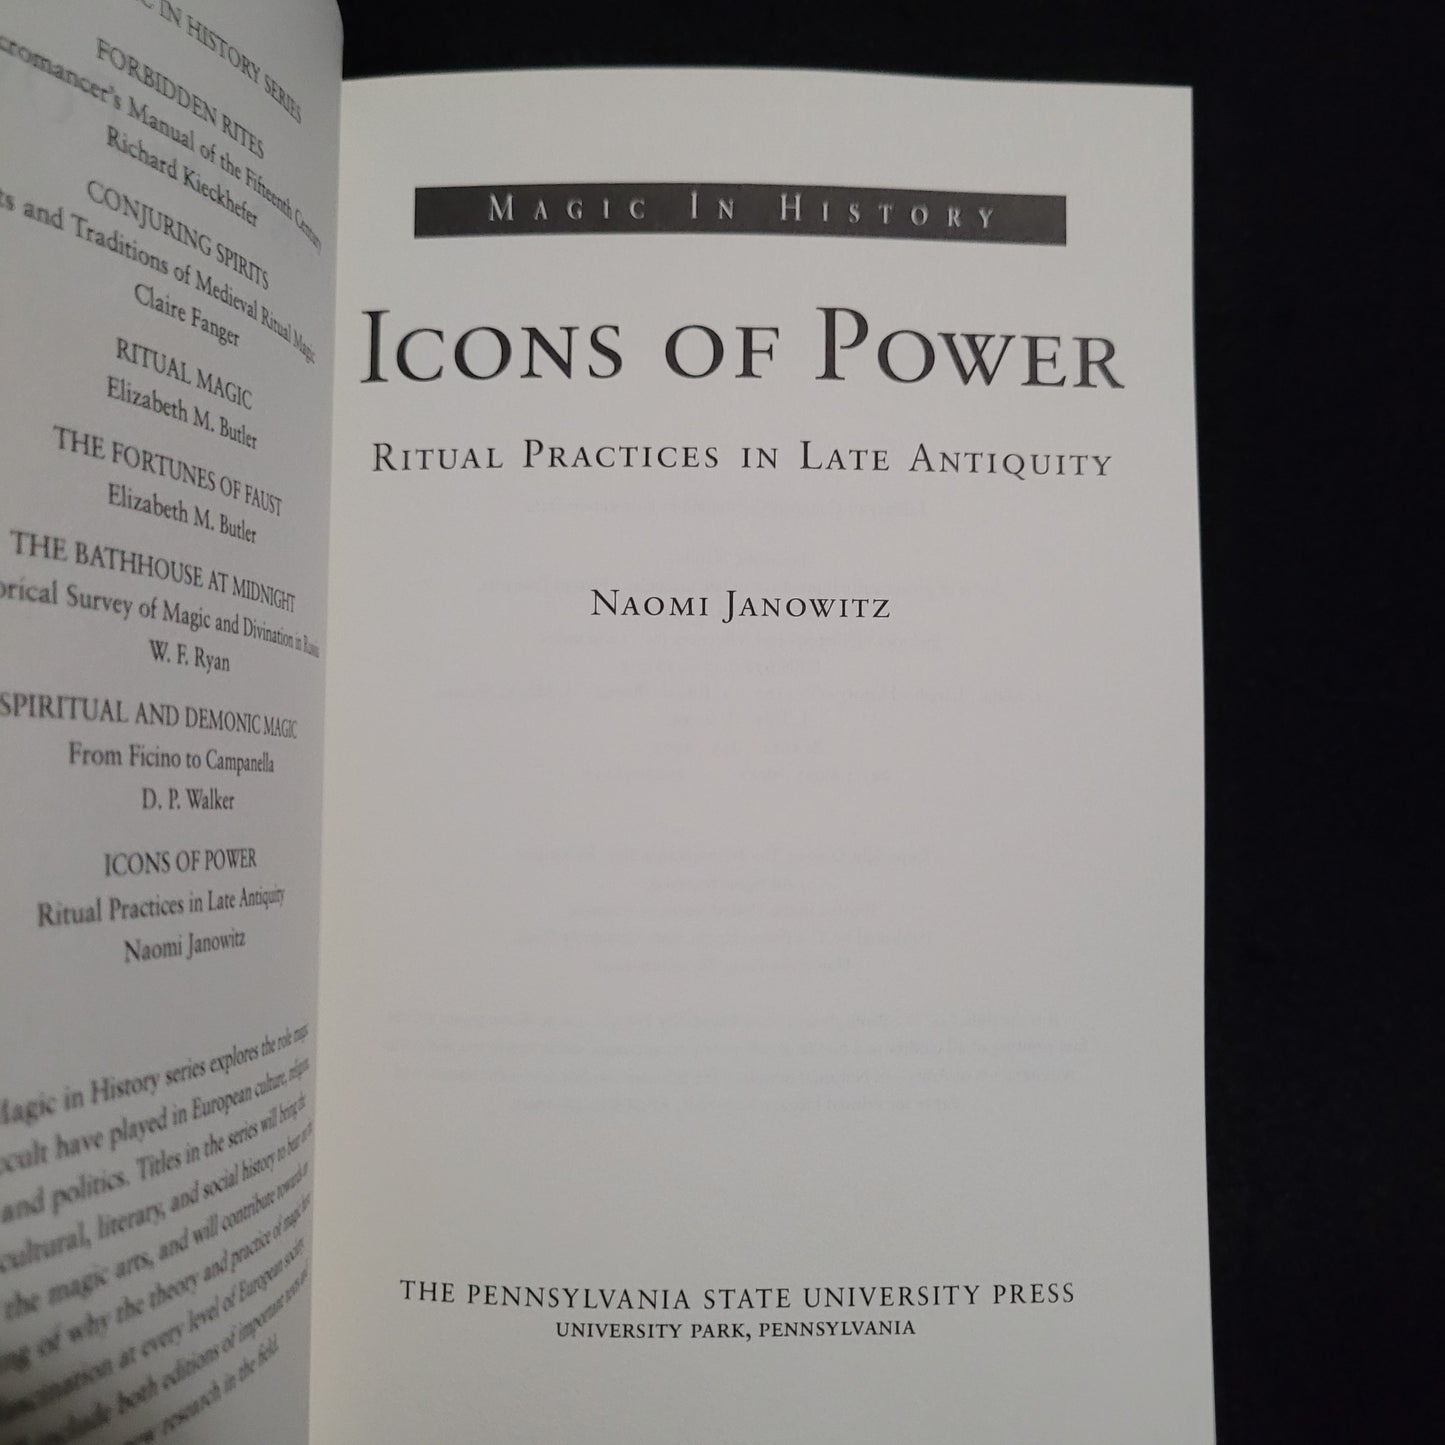 Icons of Power: Ritual Practices in Late Antiquity (Magic in History) by Naomi Janowitz (The Pennsylvania State University Press, 2002) Paperback